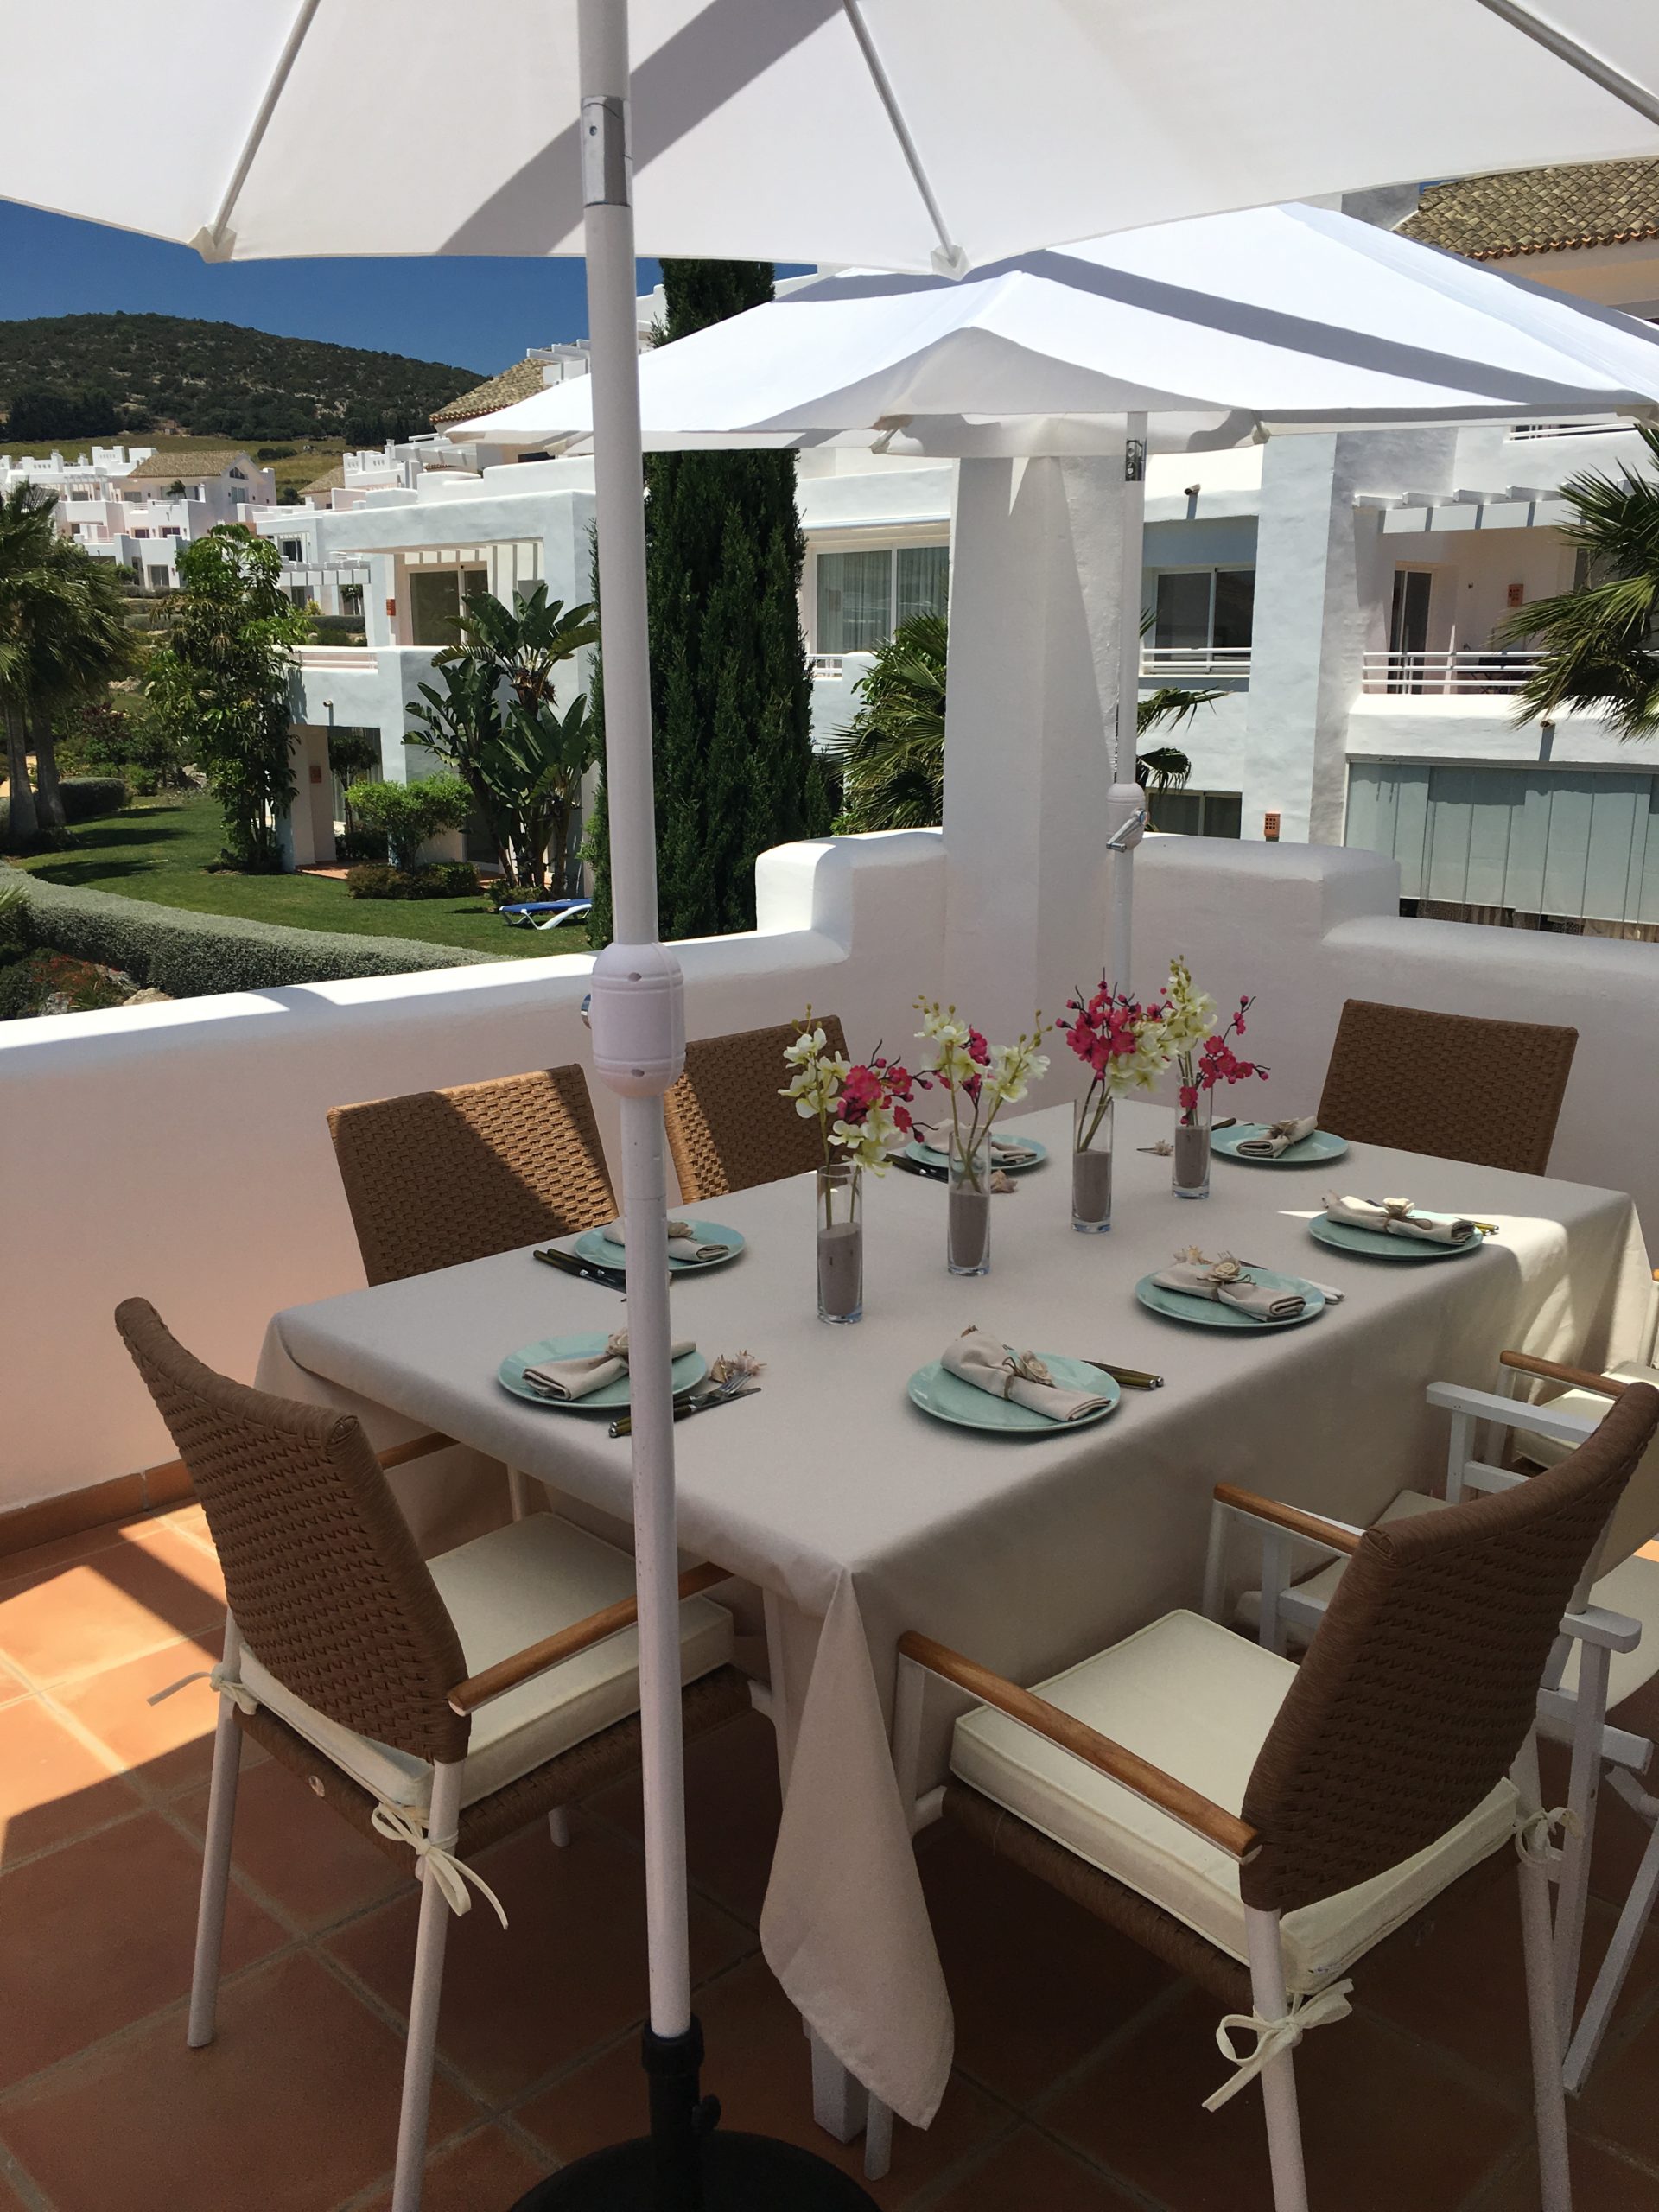 Image shows the dining table on the terrace of this stylish penthouse in Alcazaba Lagoon set for a meal